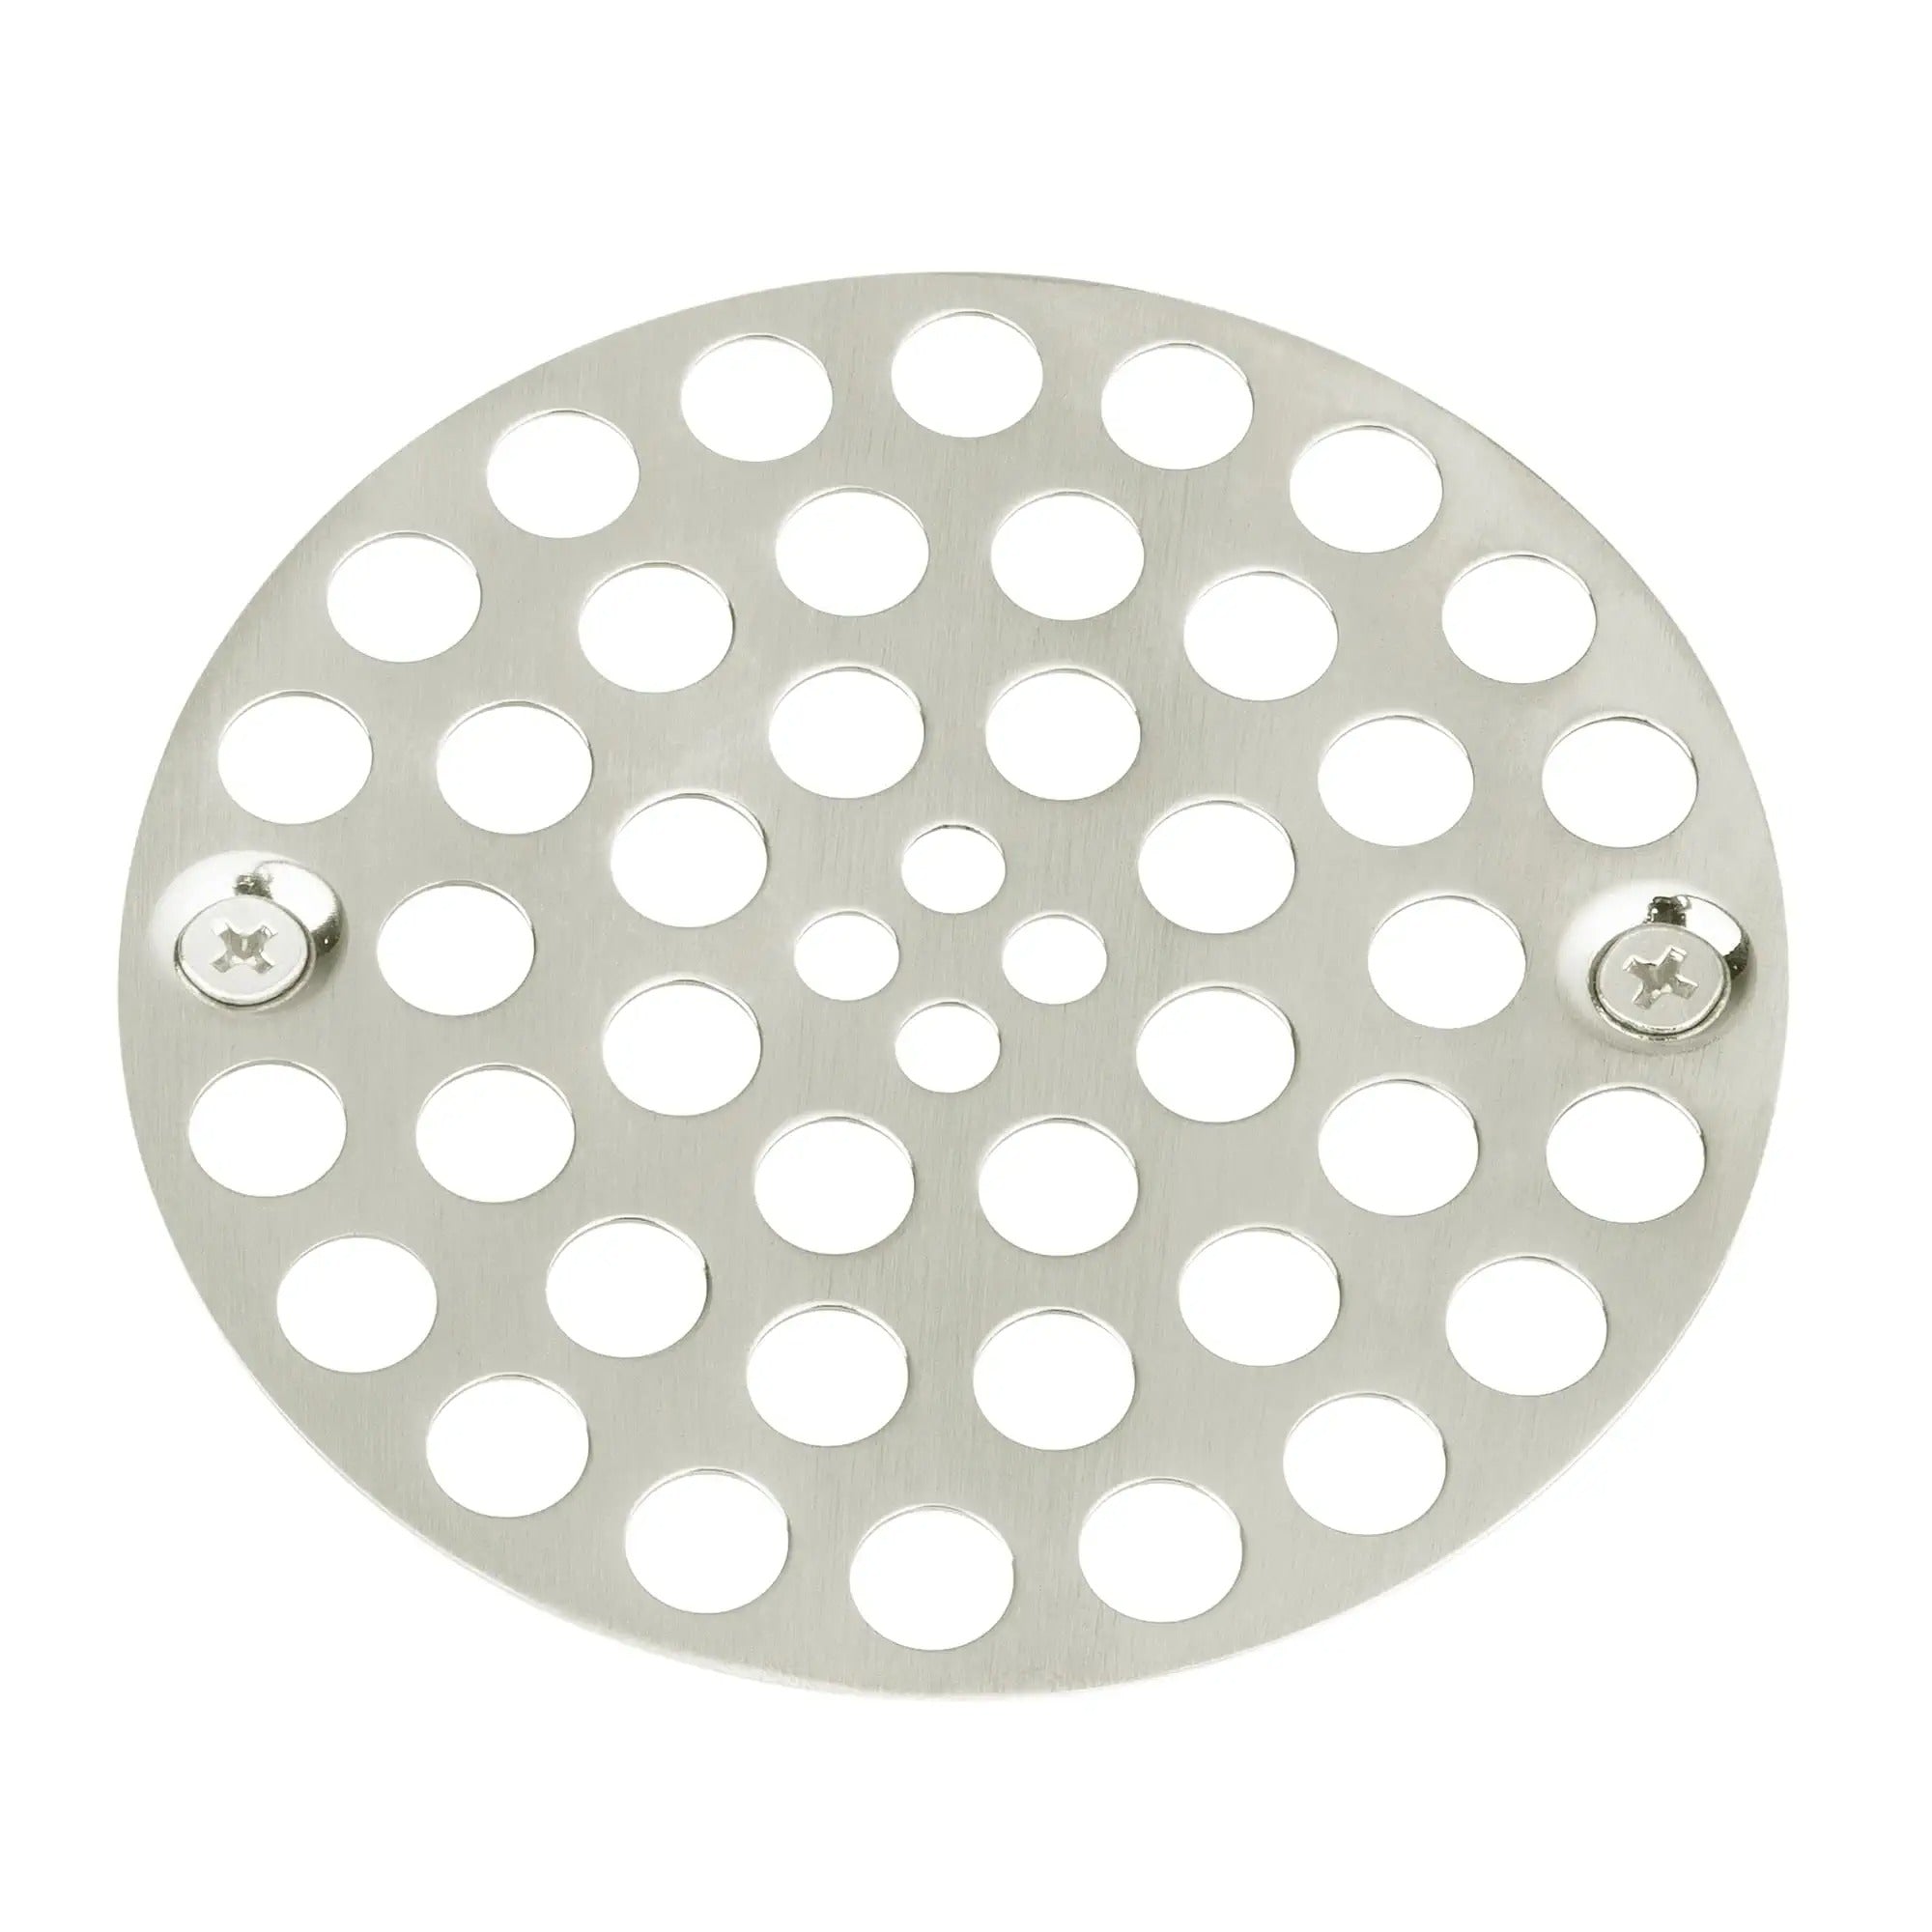 Shower Drain Cover, Brass Construction, 4-1/4 inches Outside Diameter  (Brushed Nickel)